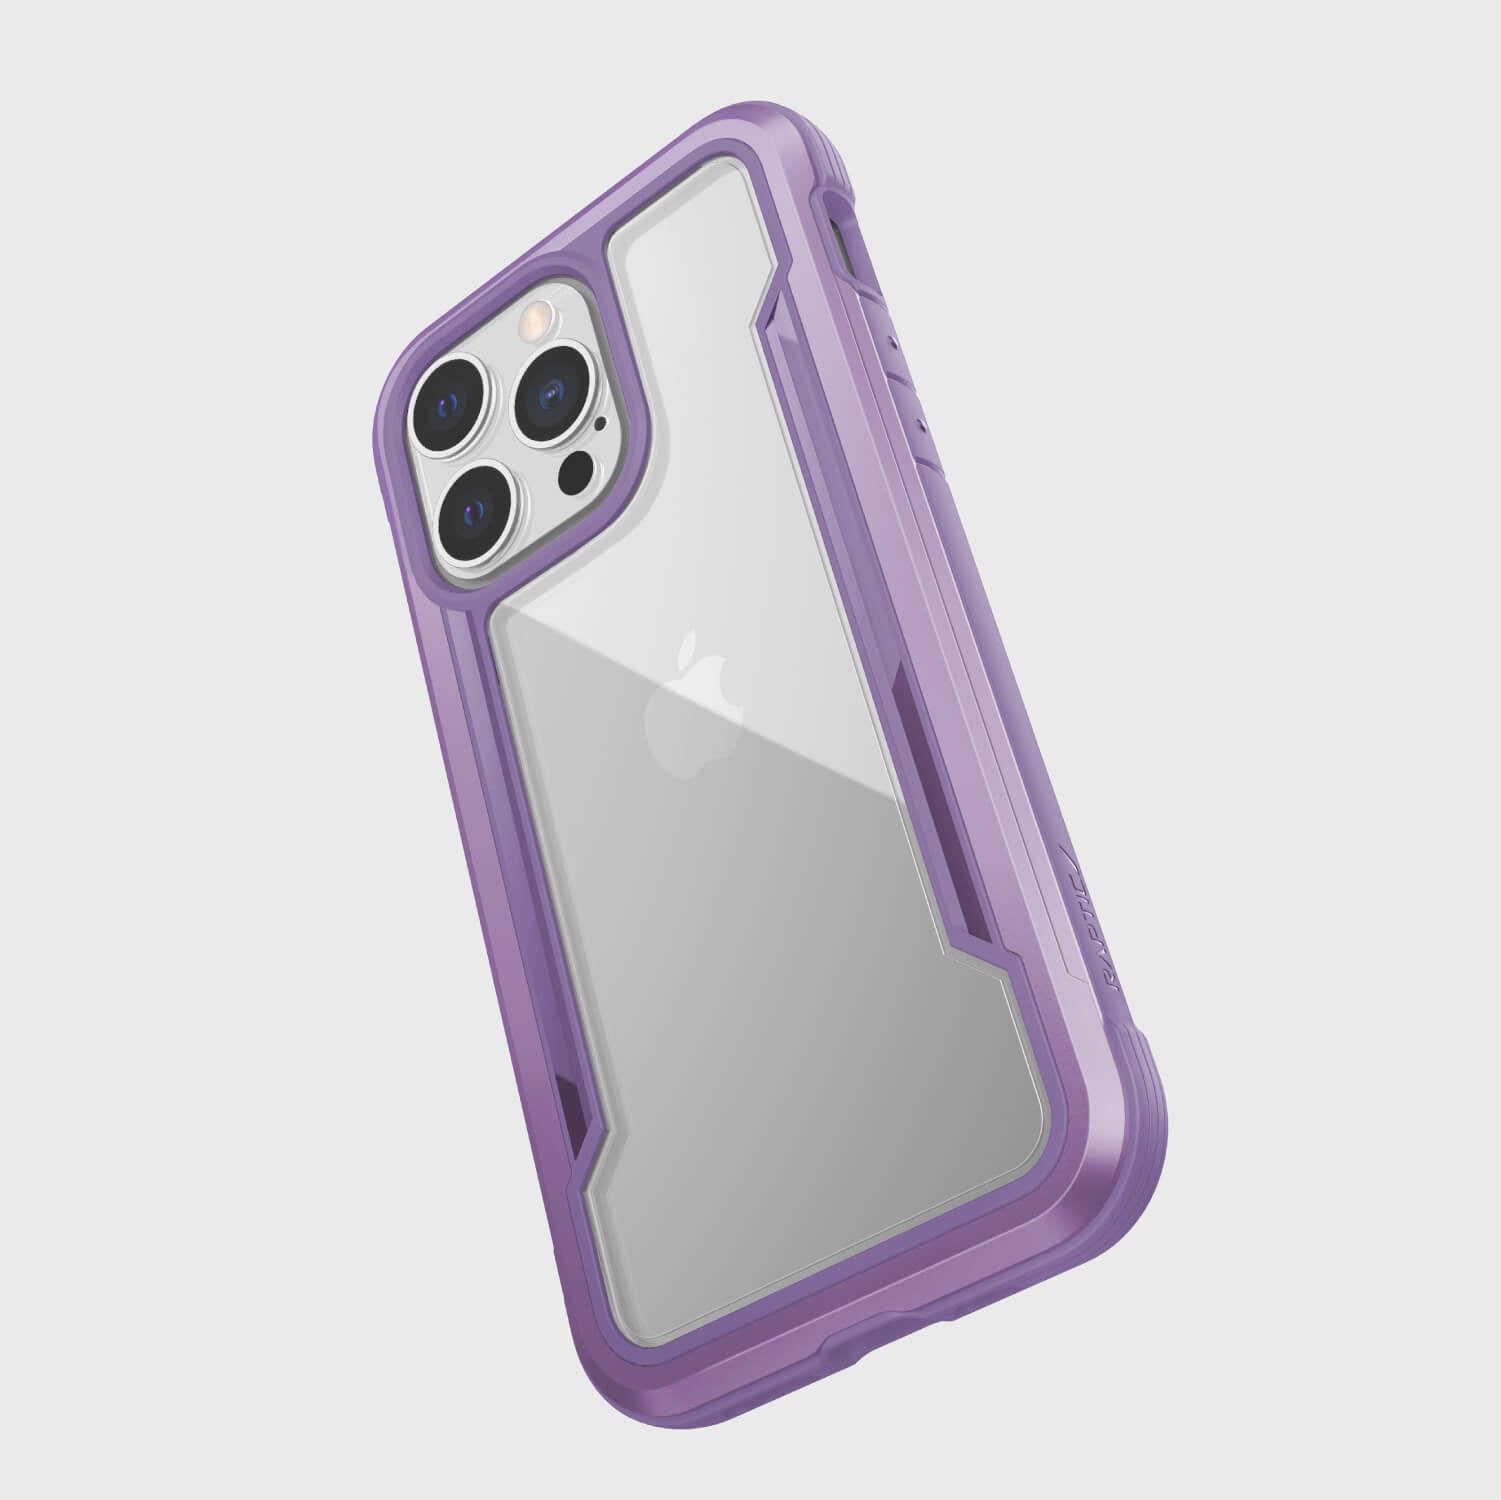 The back view of an SHIELD PRO case in purple.